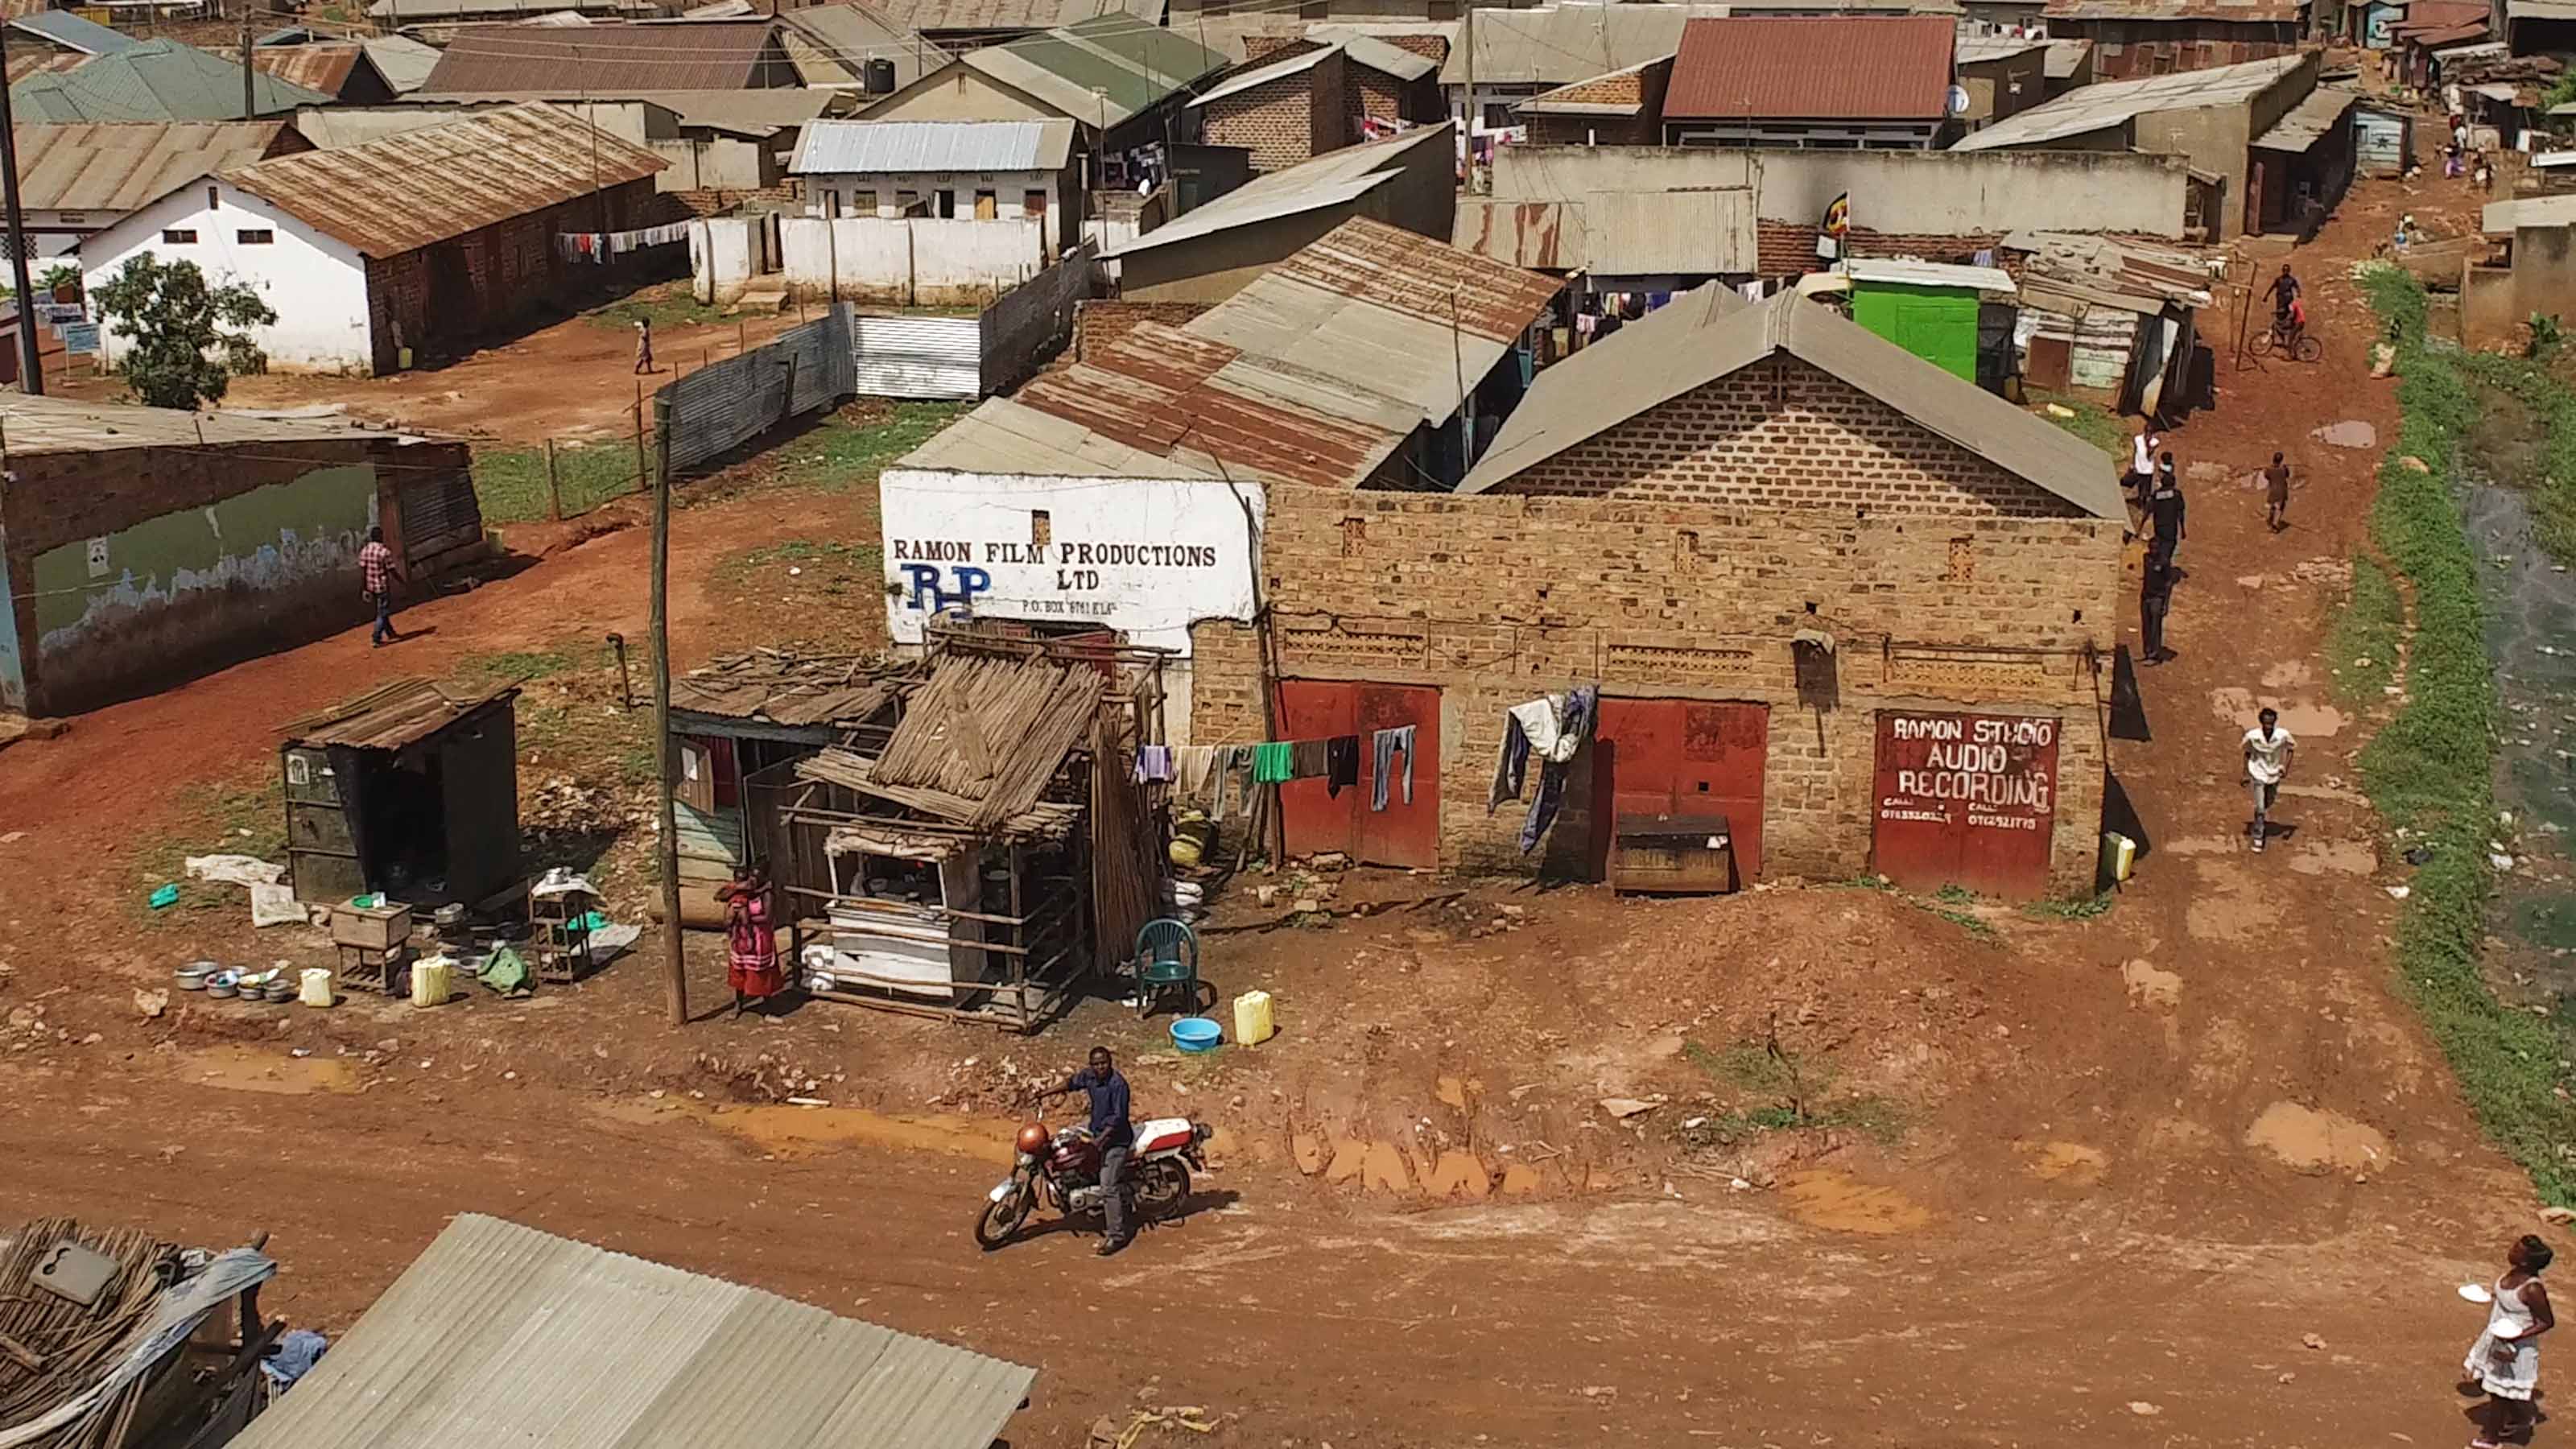 Still from Once Upon a Time in Uganda. An slight bird's eye view of a small village. There are people walking and on bikes.